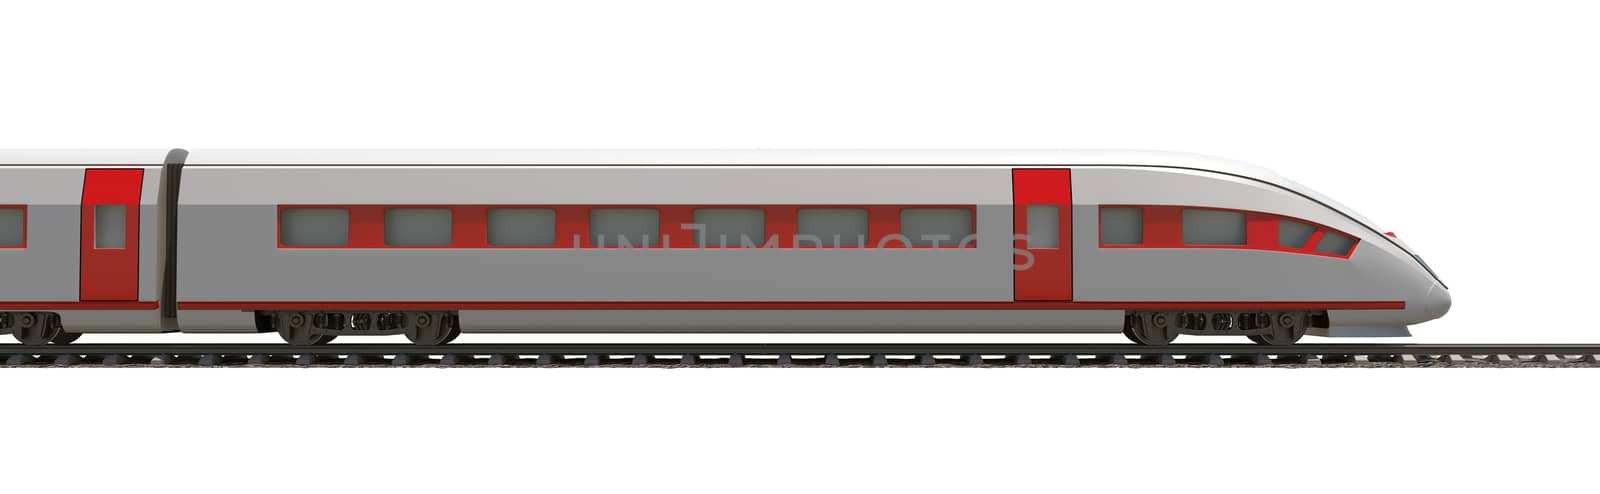 Long train with stripes on isolated white background